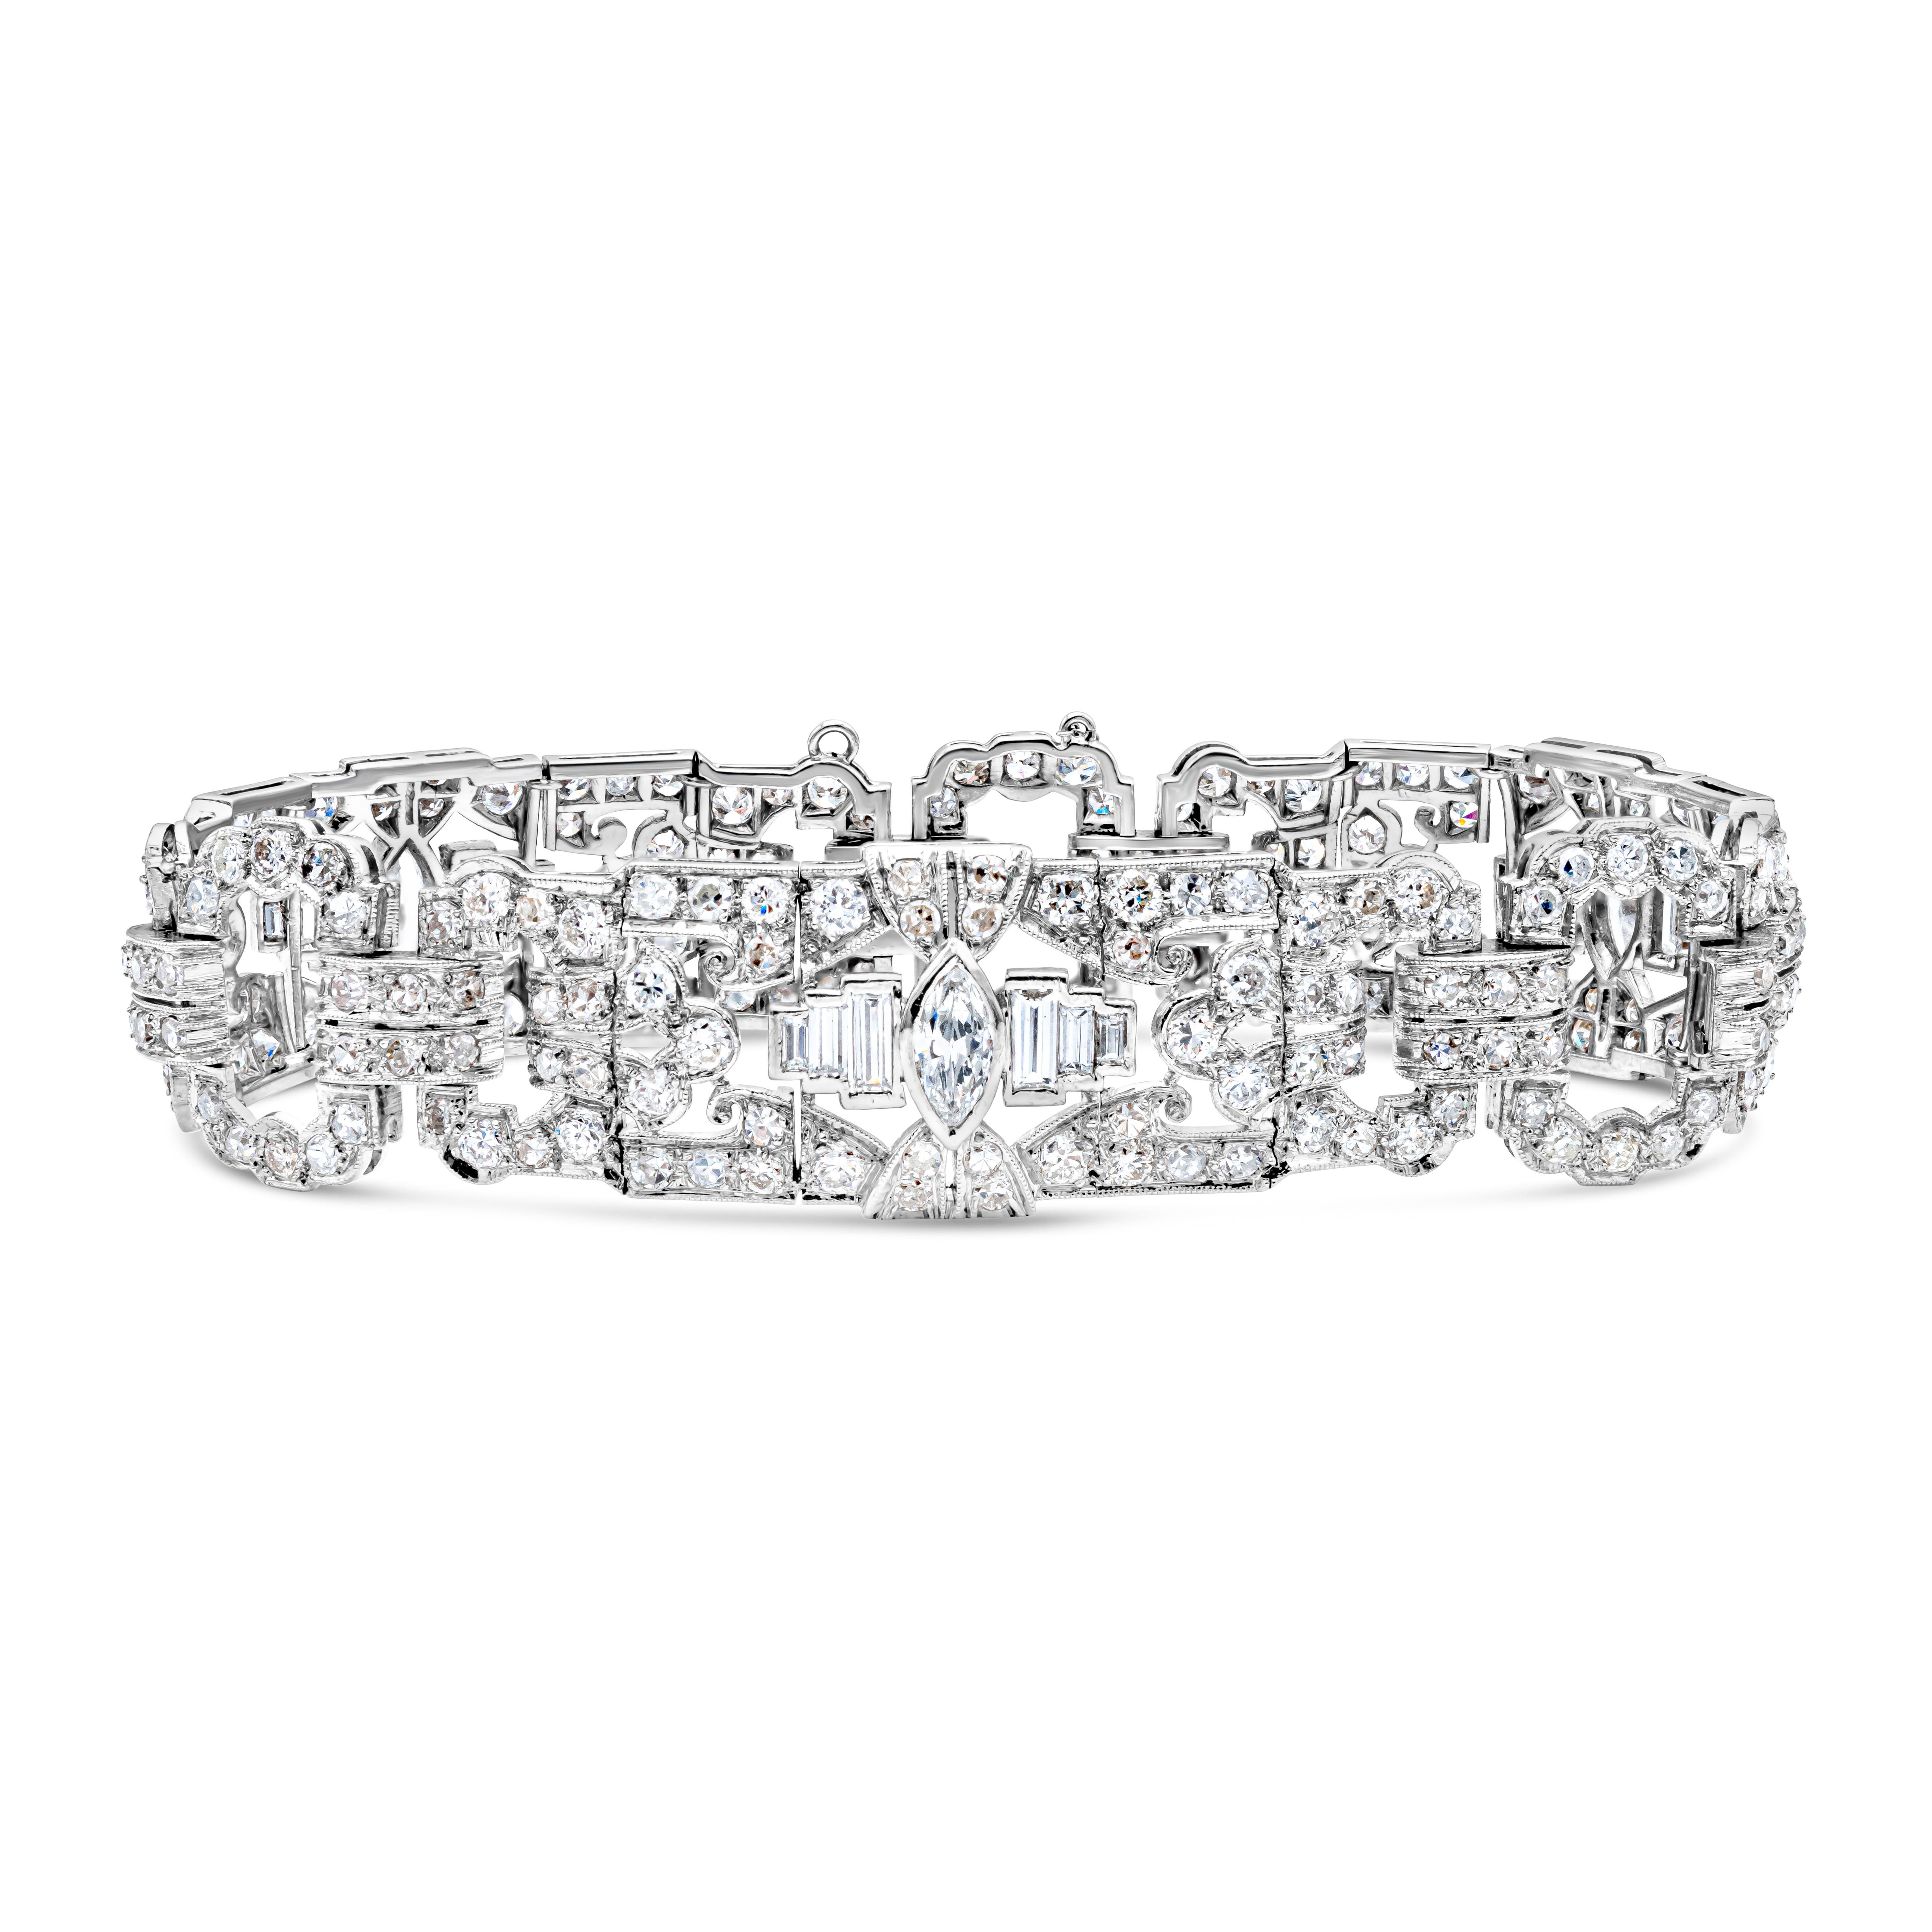 An antique Art Deco bracelet showcasing a fancy cut diamonds weighing 14.30 carats total, set in an intricate open-work design. Finely made in Platinum and 7 inches in length.

